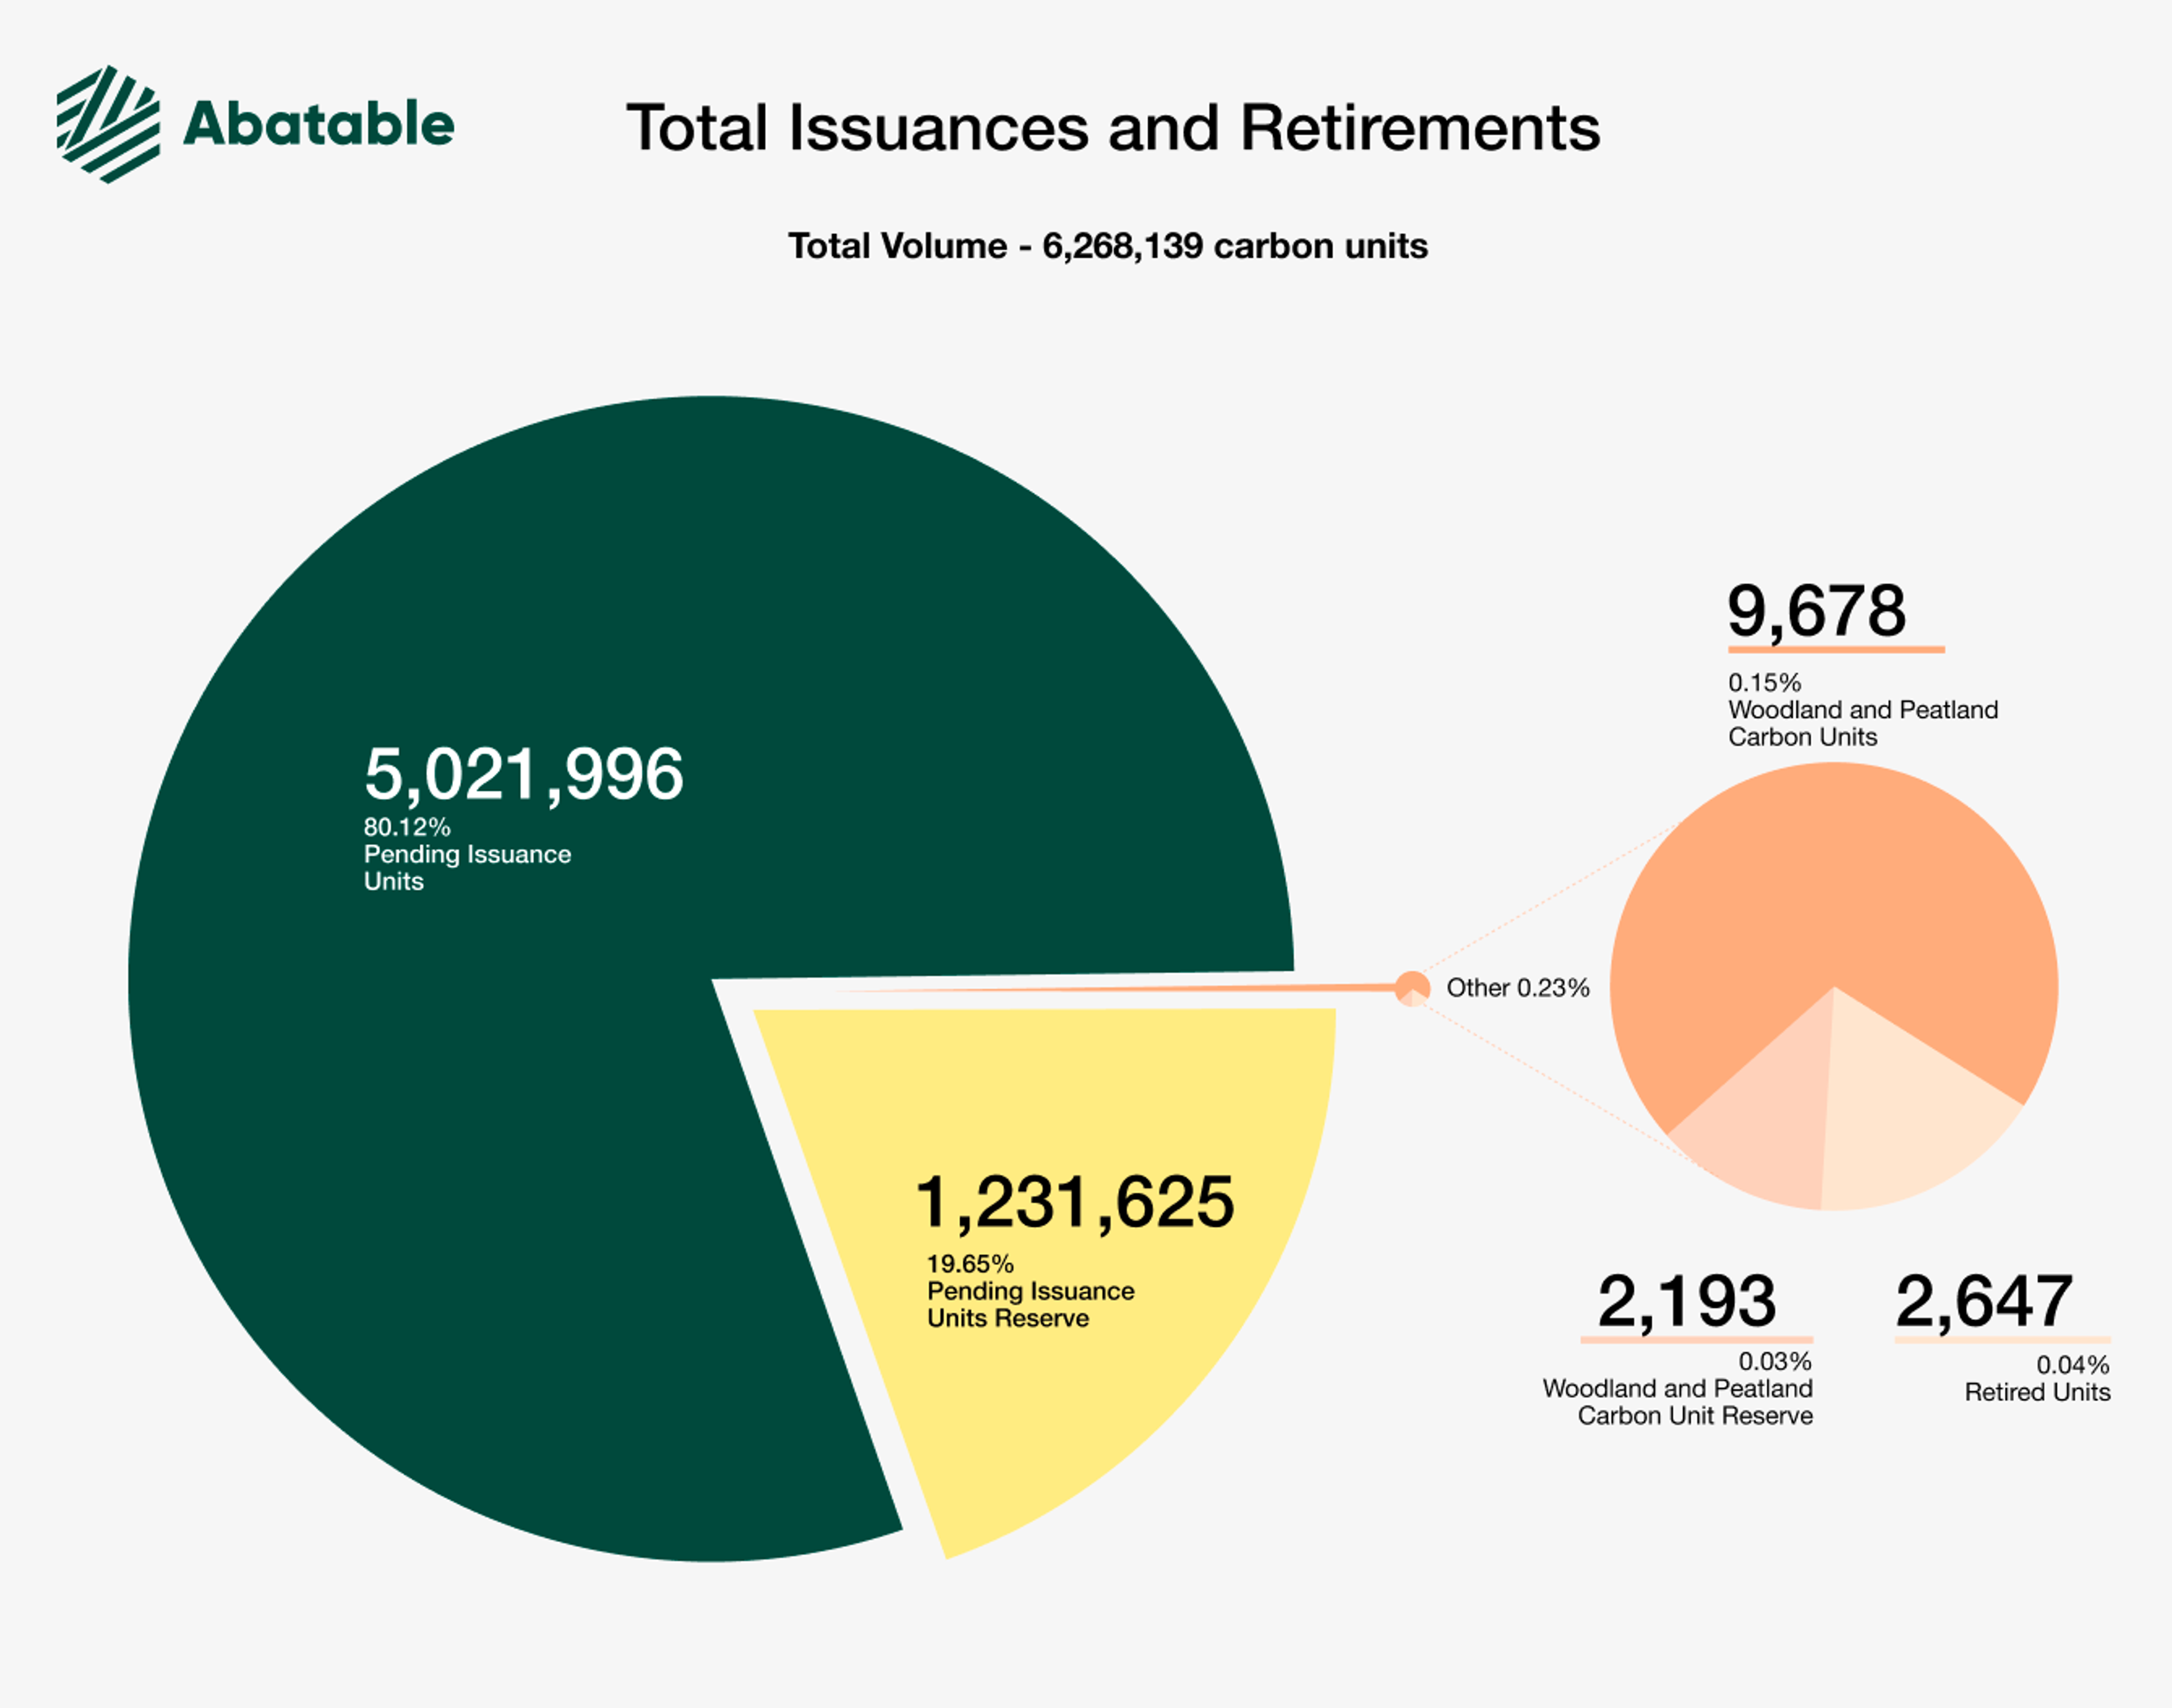 UK Voluntary Carbon Market Total Issuances and Retirements